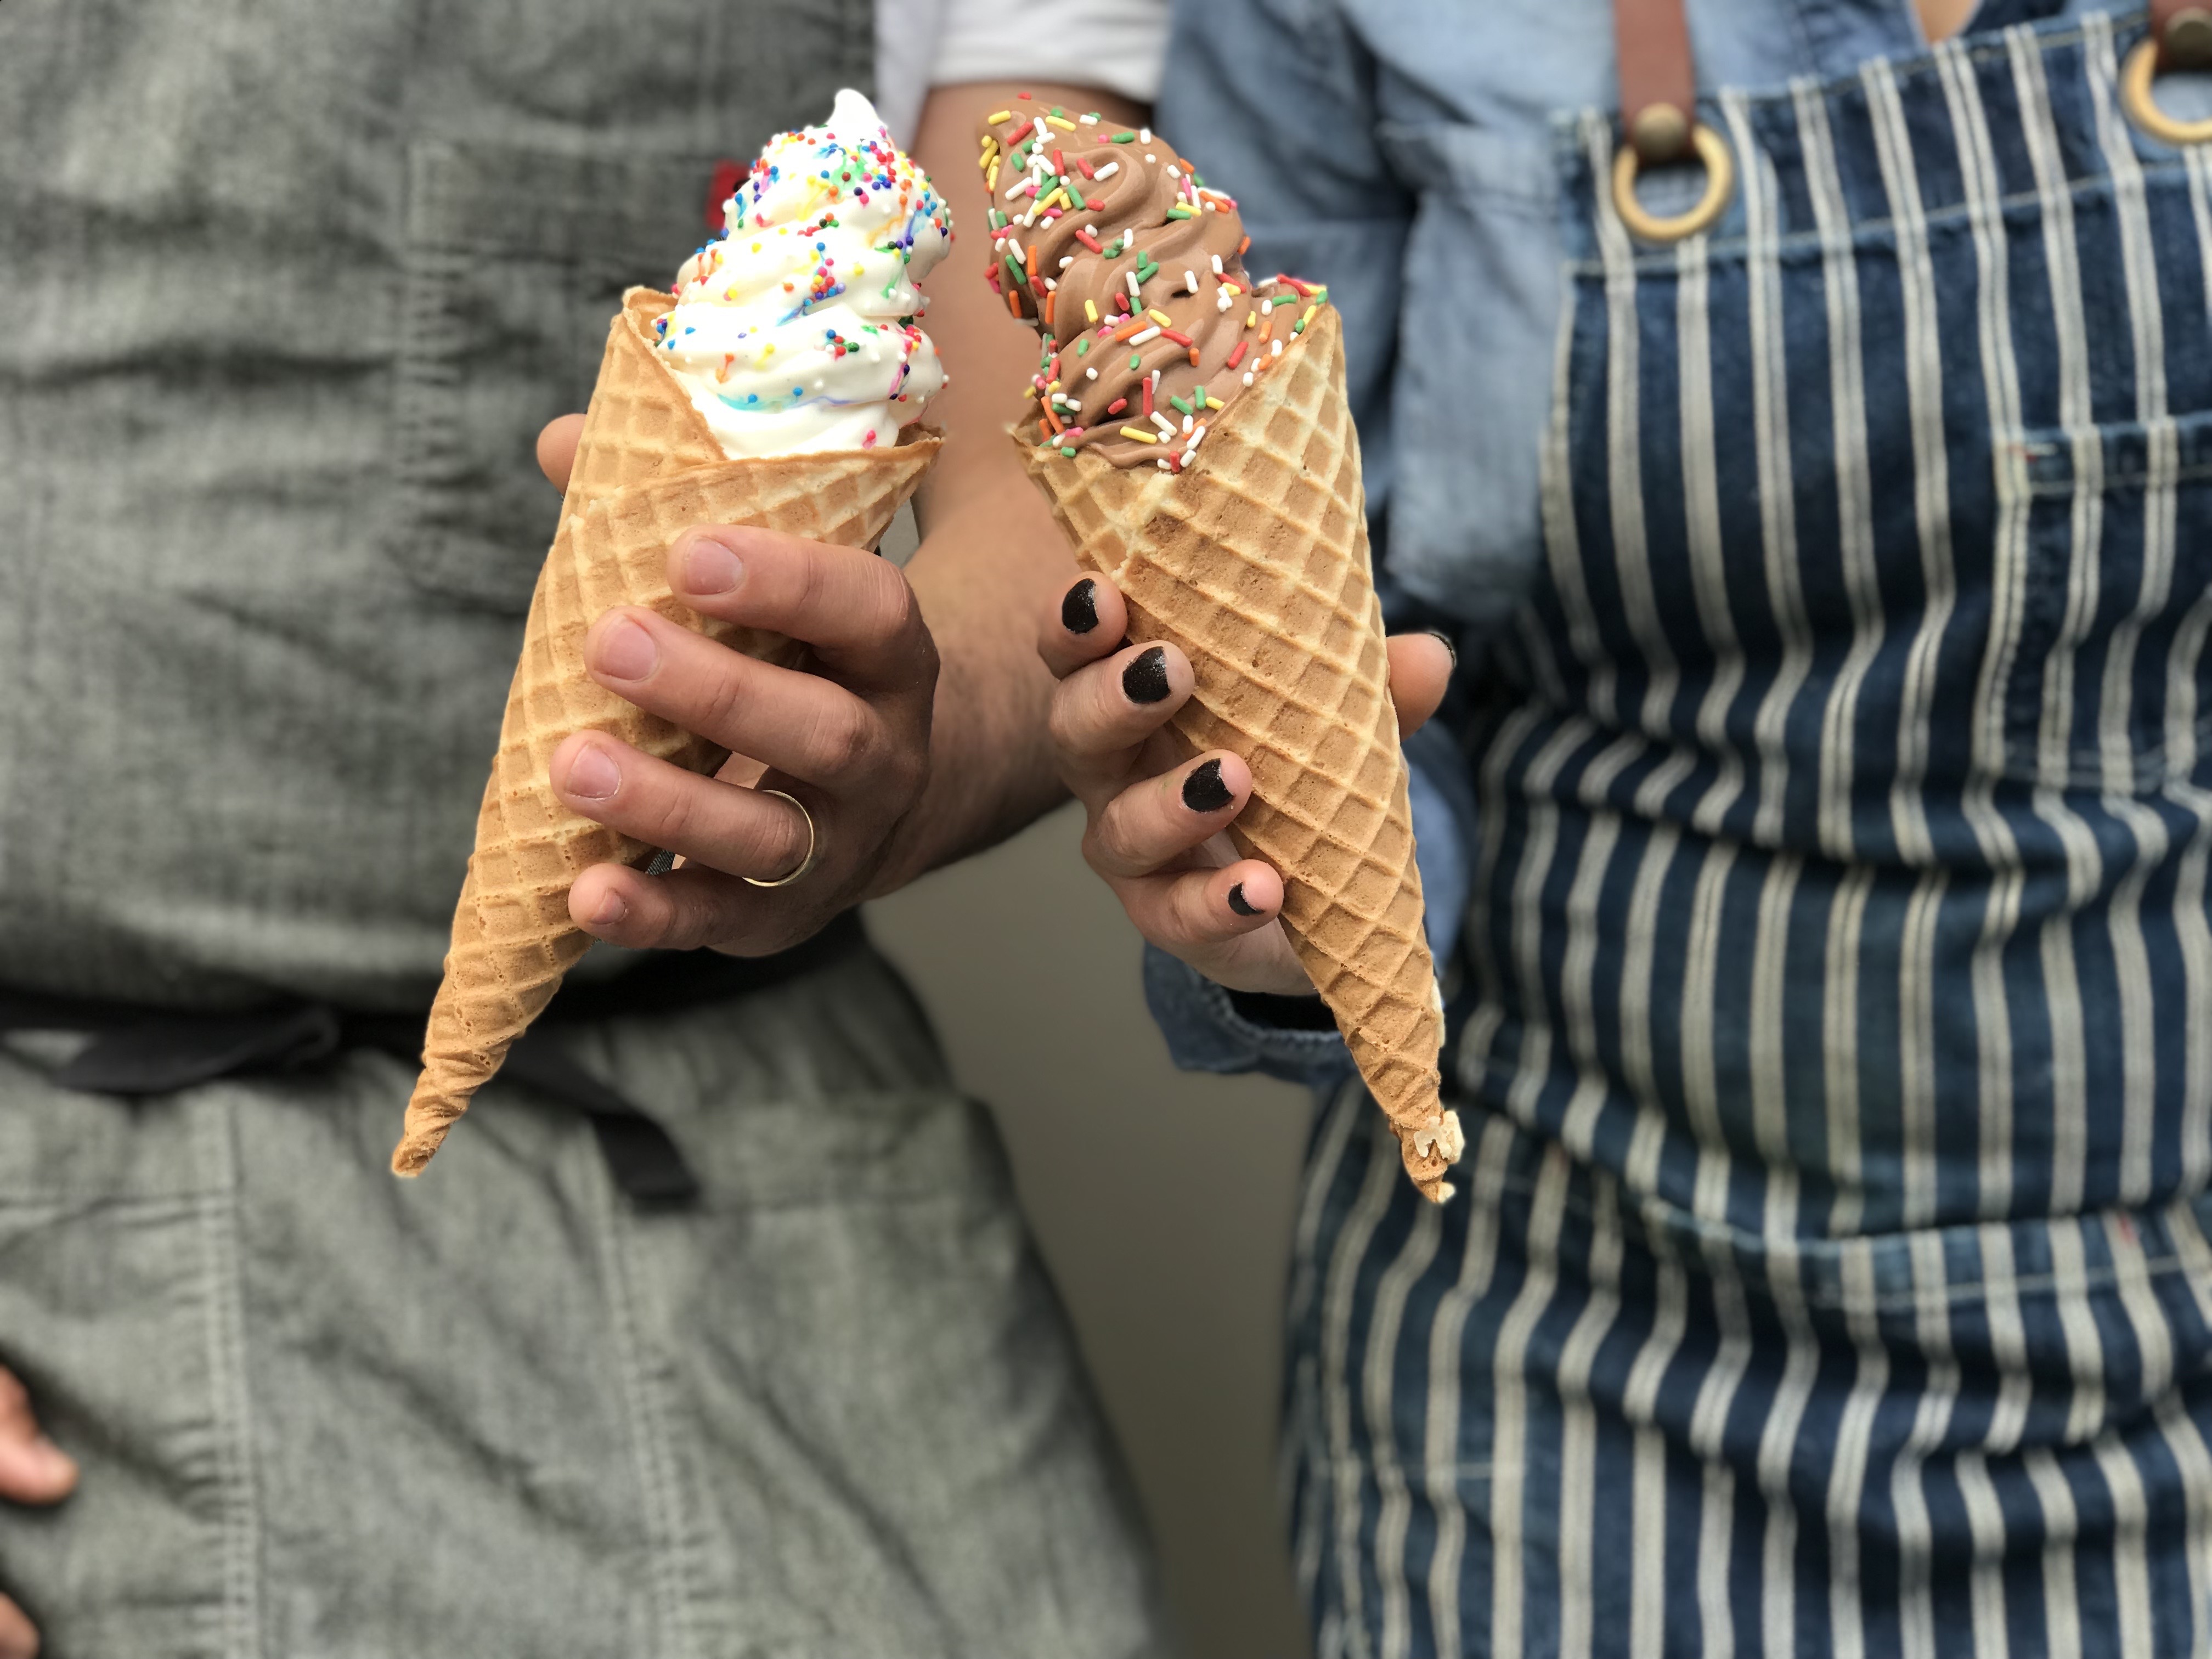 Two people hold ice cream cones at Sugarpine.